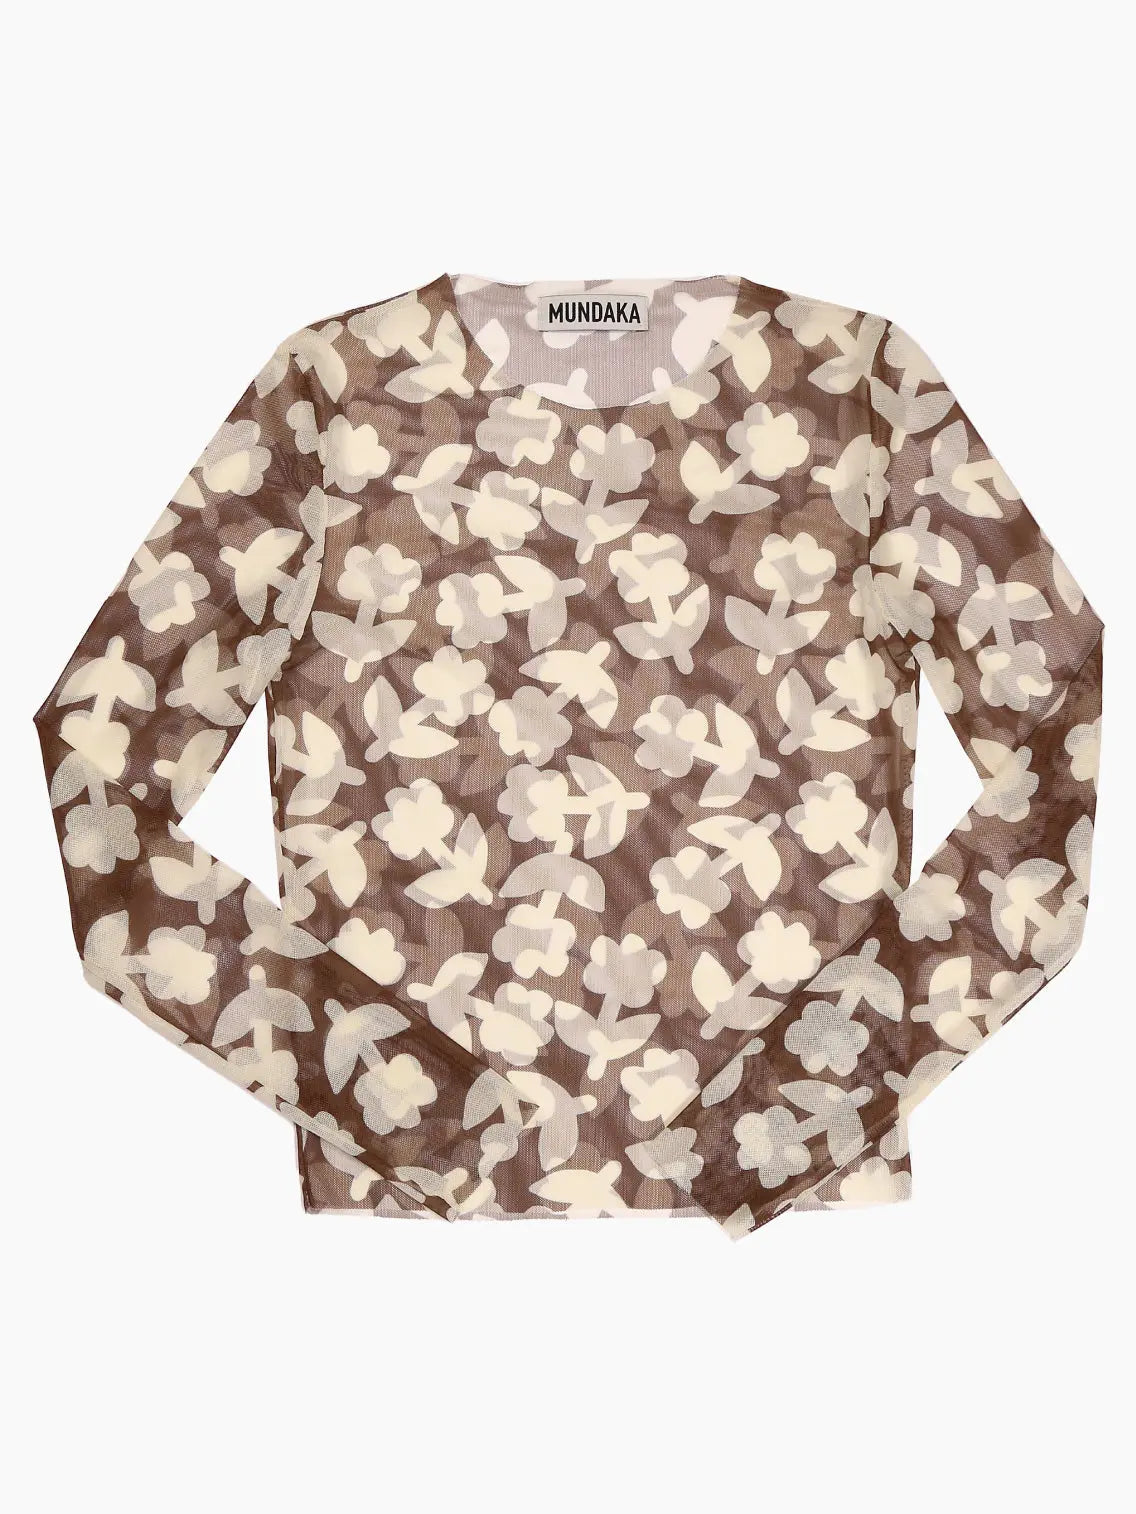 A long-sleeved, sheer mesh top with a floral pattern featuring beige and light gray flowers over a brown background. The label at the collar reads "Mundaka." Available at bassalstore in Barcelona, the Tulle T-Shirt Brown by Mundaka has a fitted style and is laid flat against a white background.